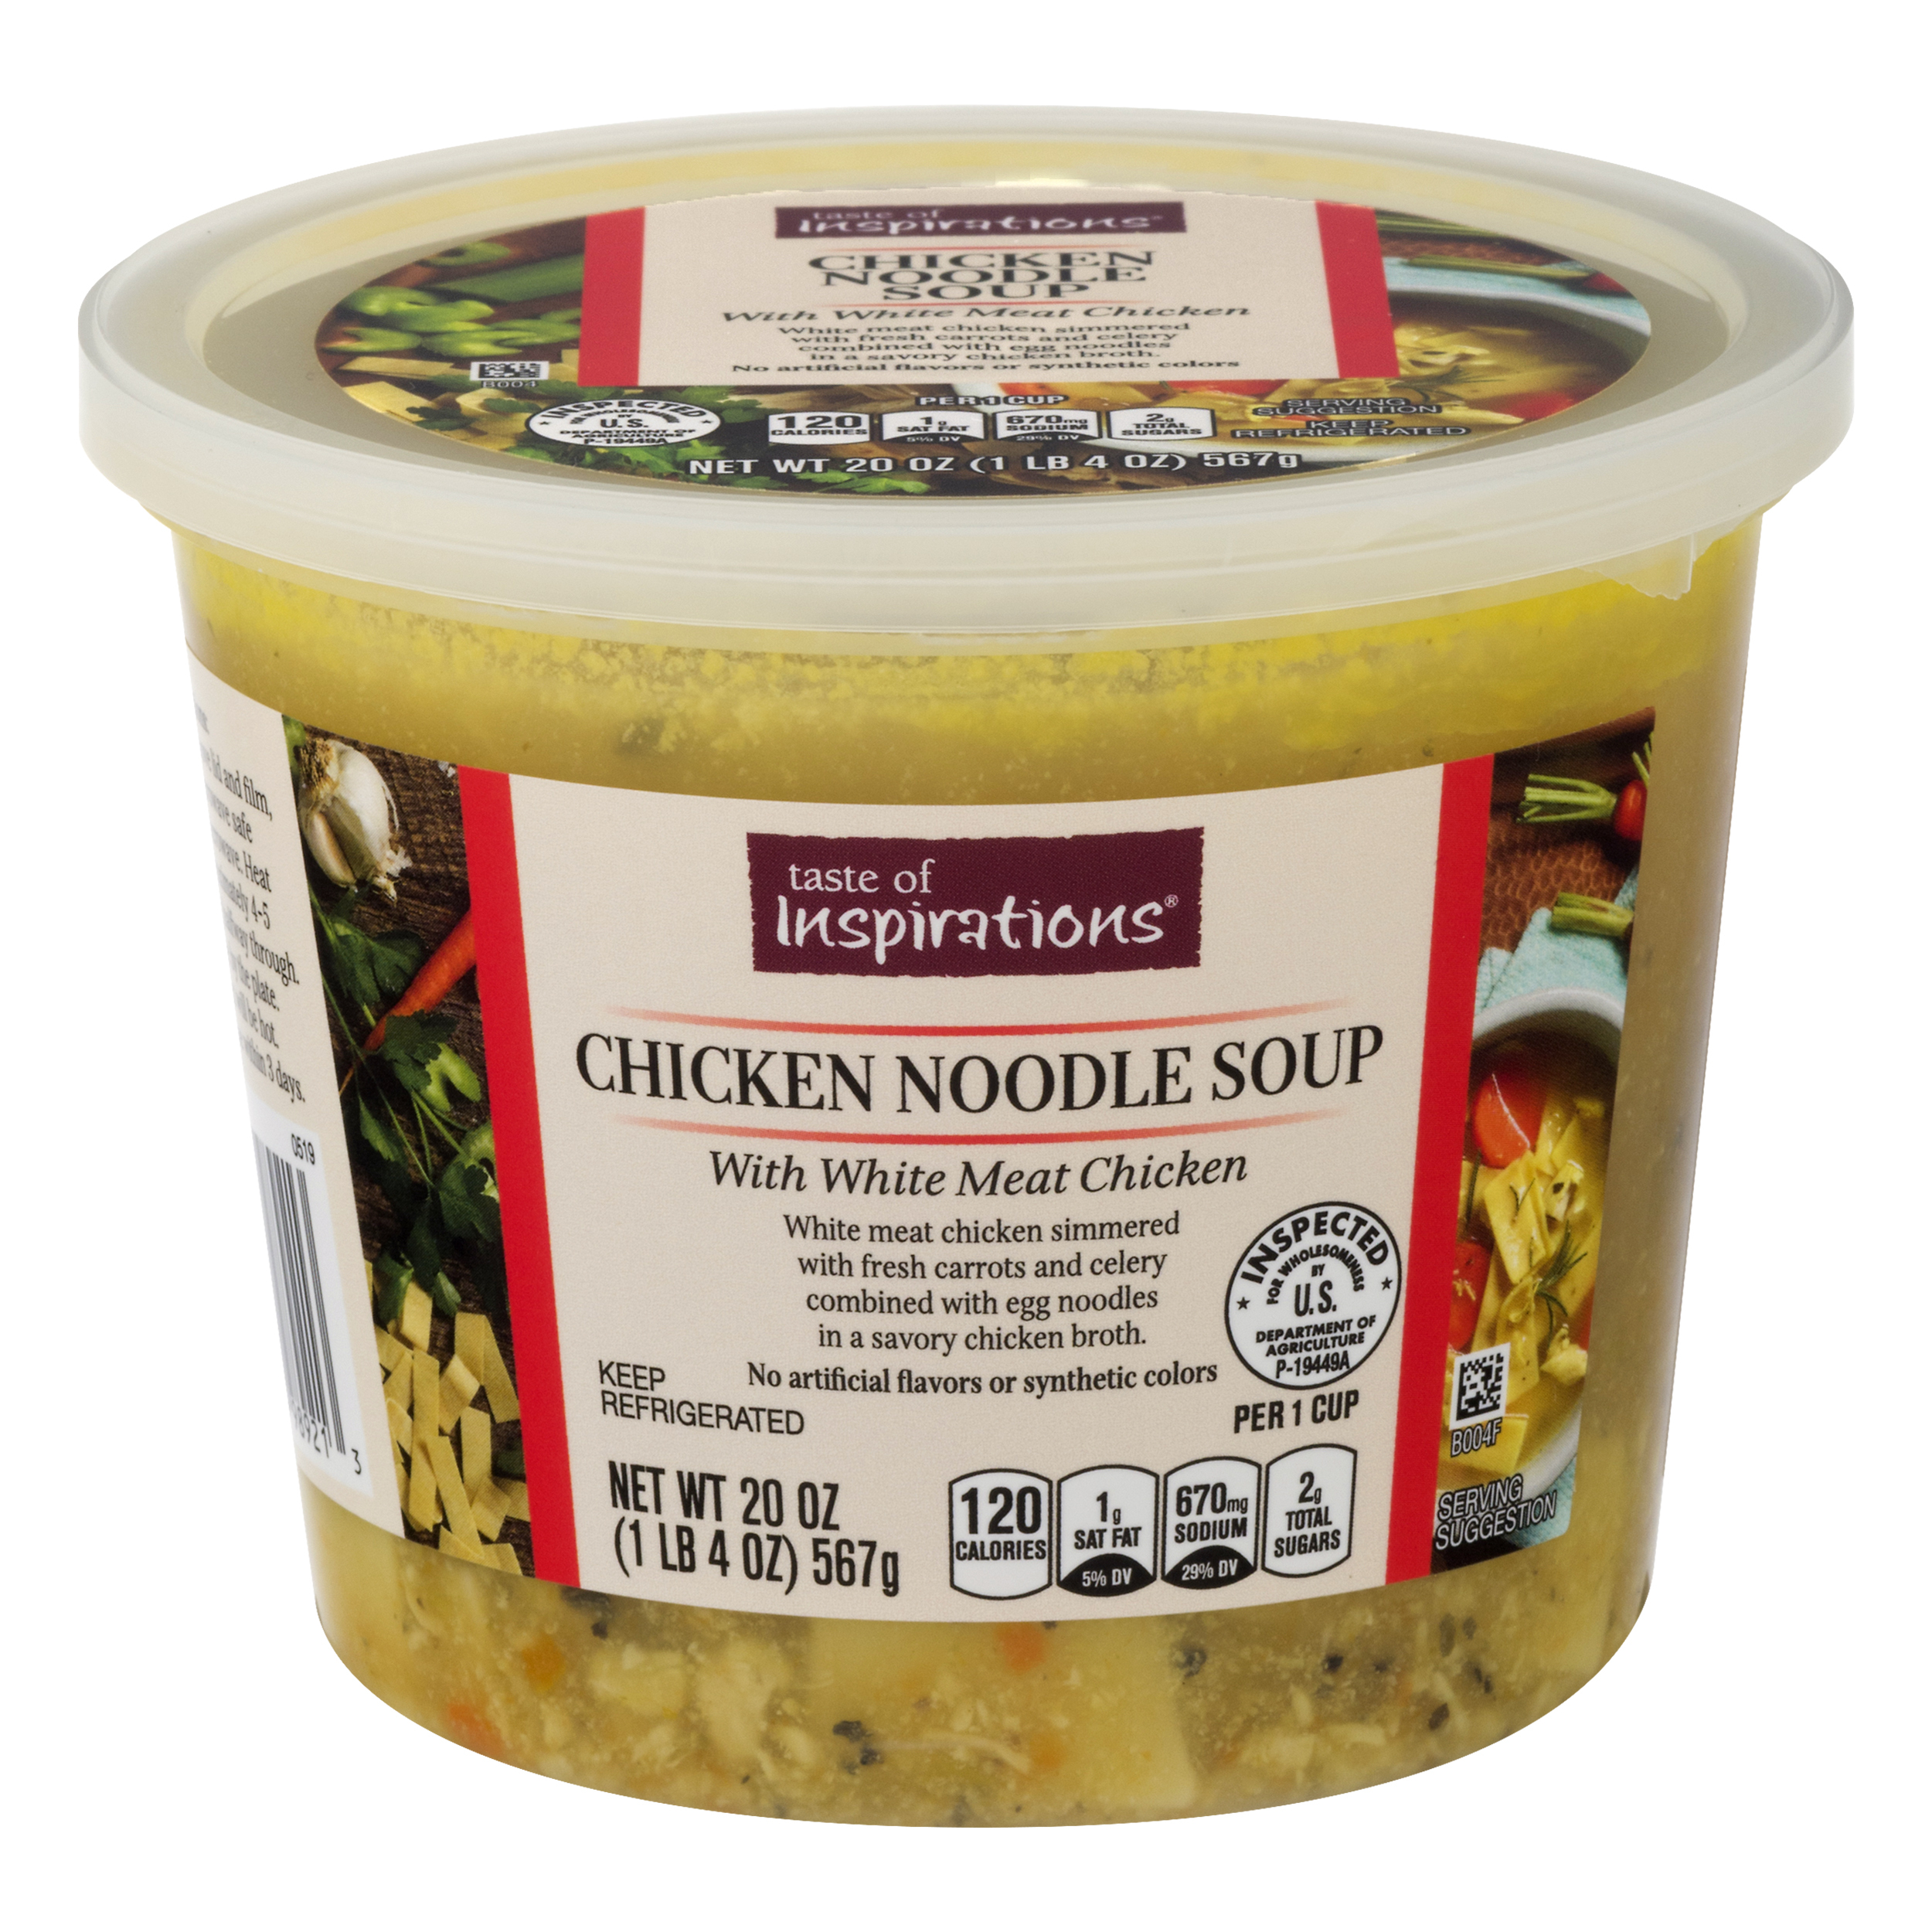 Taste of Inspirations with White Meat Chicken Chicken Noodle Soup 20 oz ...